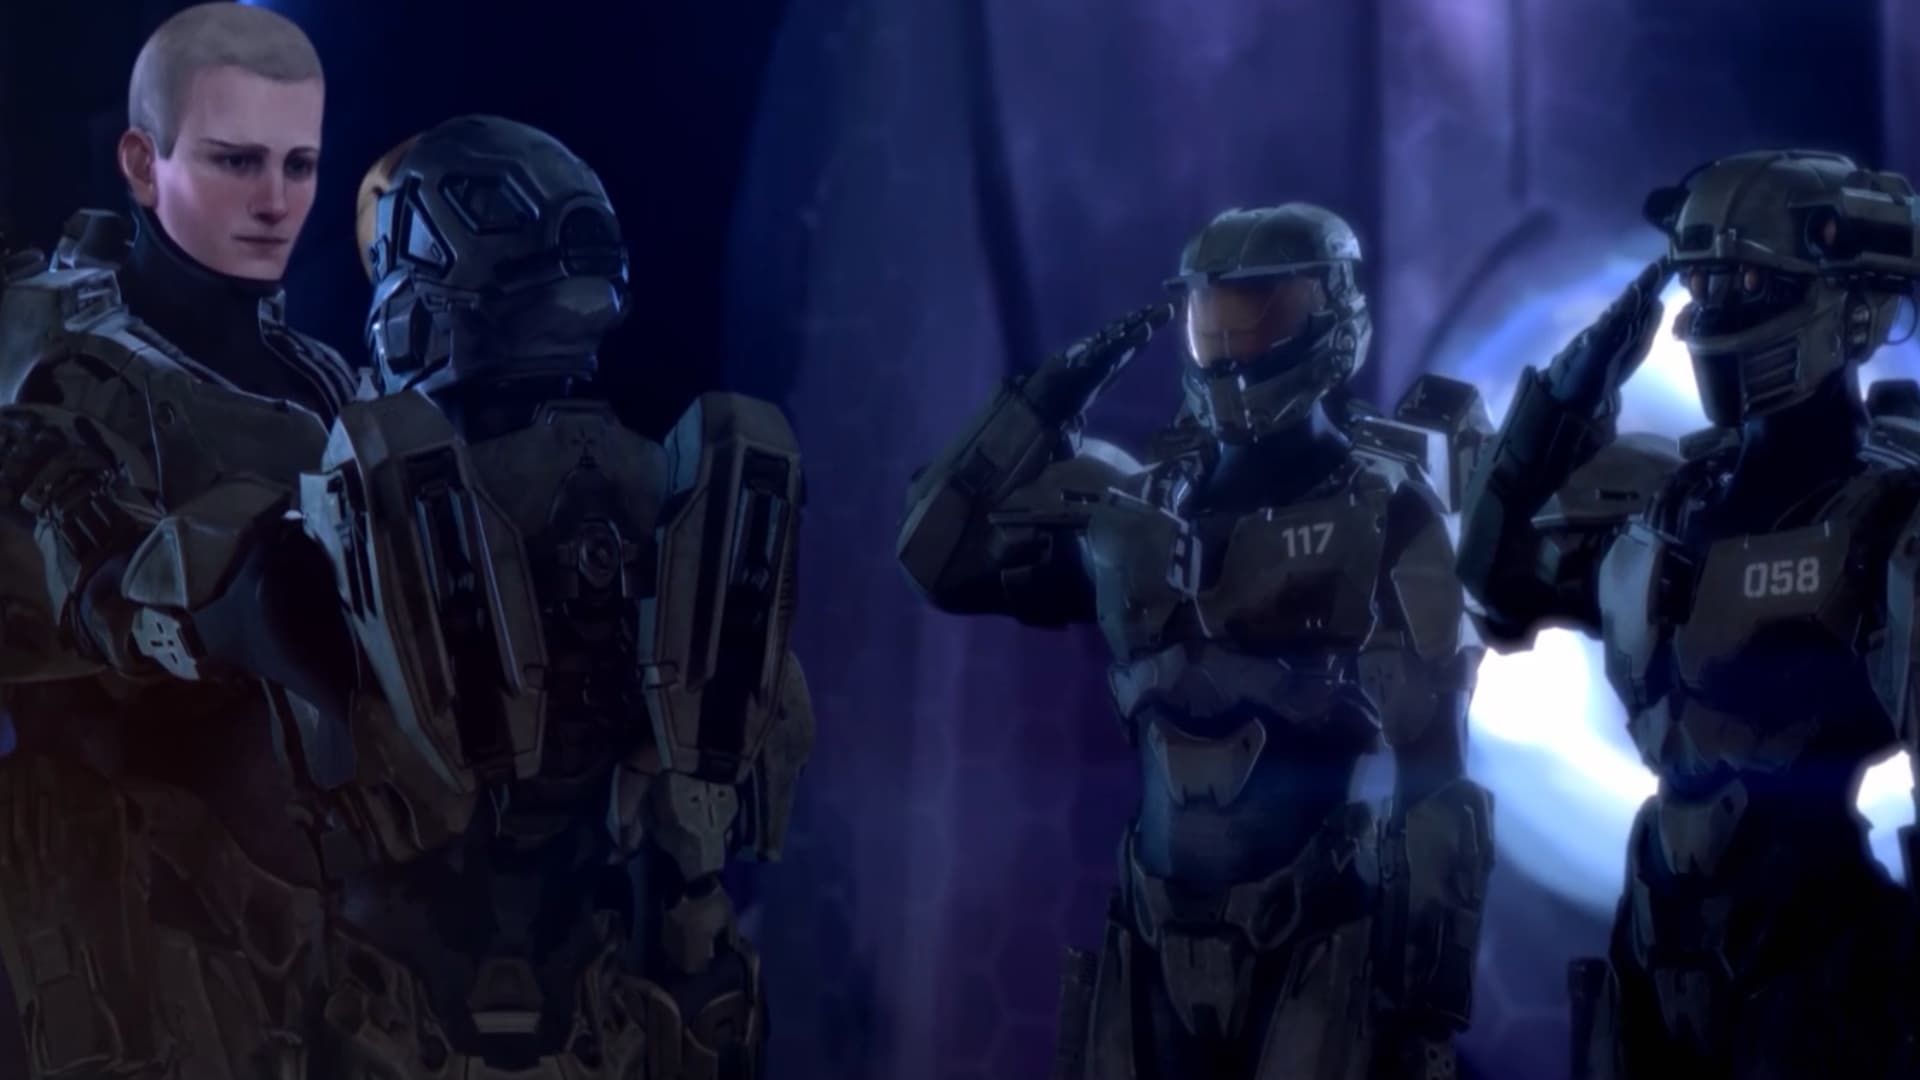 Halo: The Fall of Reach background